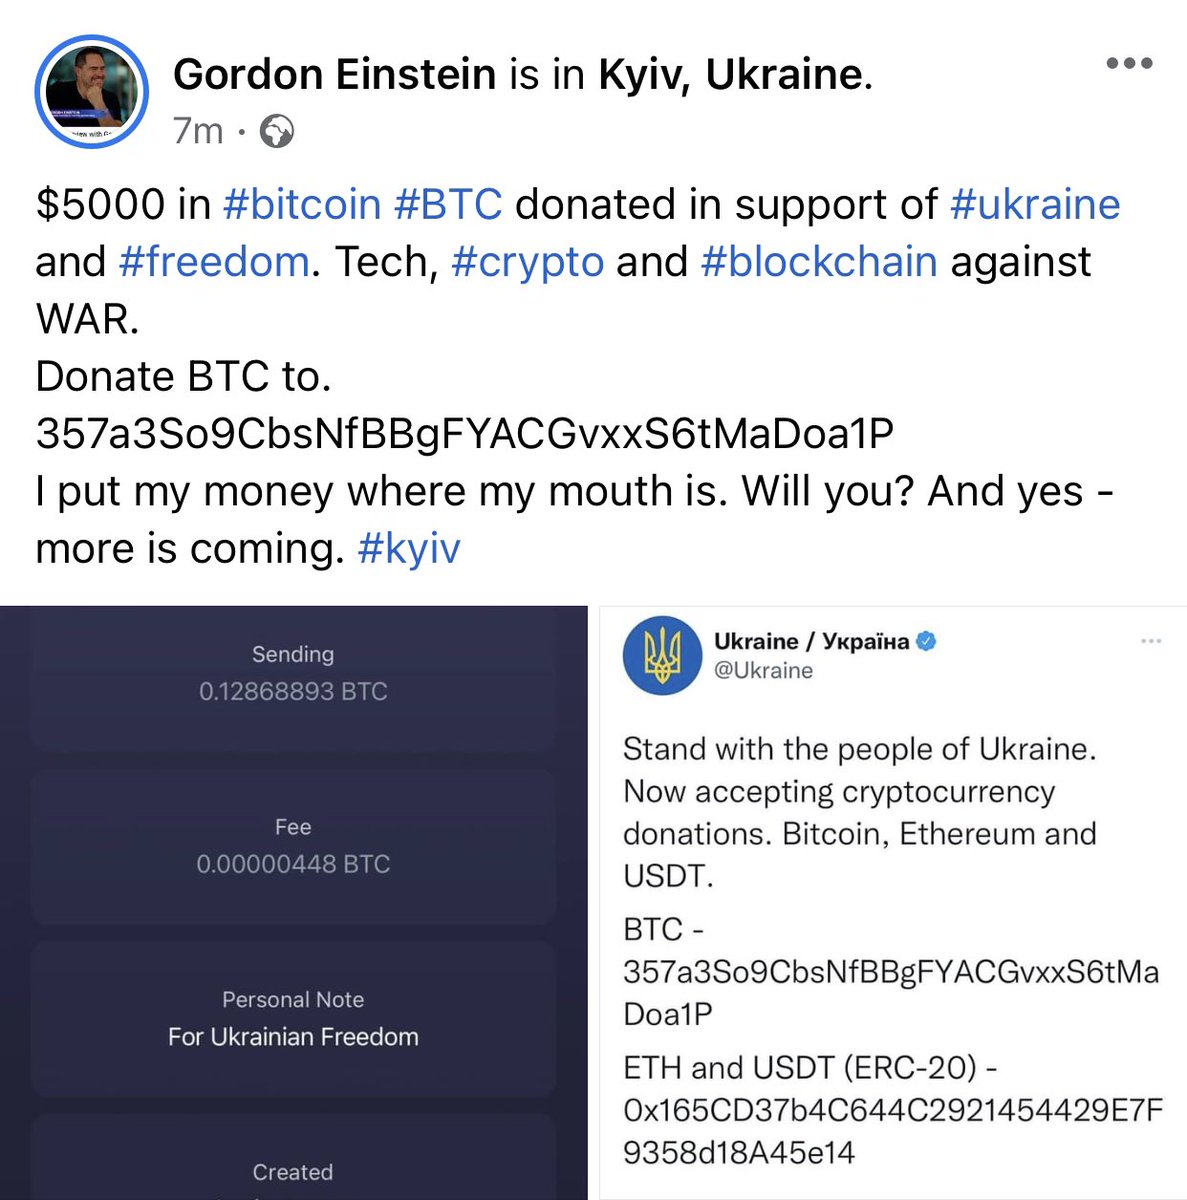 $5000 in #bitcoin #BTC donated in support of #ukraine and #freedom. Tech, #crypto and #blockchain against WAR. Donate BTC to. 357a3So9CbsNfBBgFYACGvxxS6tMaDoa1P I put my money where my mouth is. Will you? And yes - more is coming. #kyiv